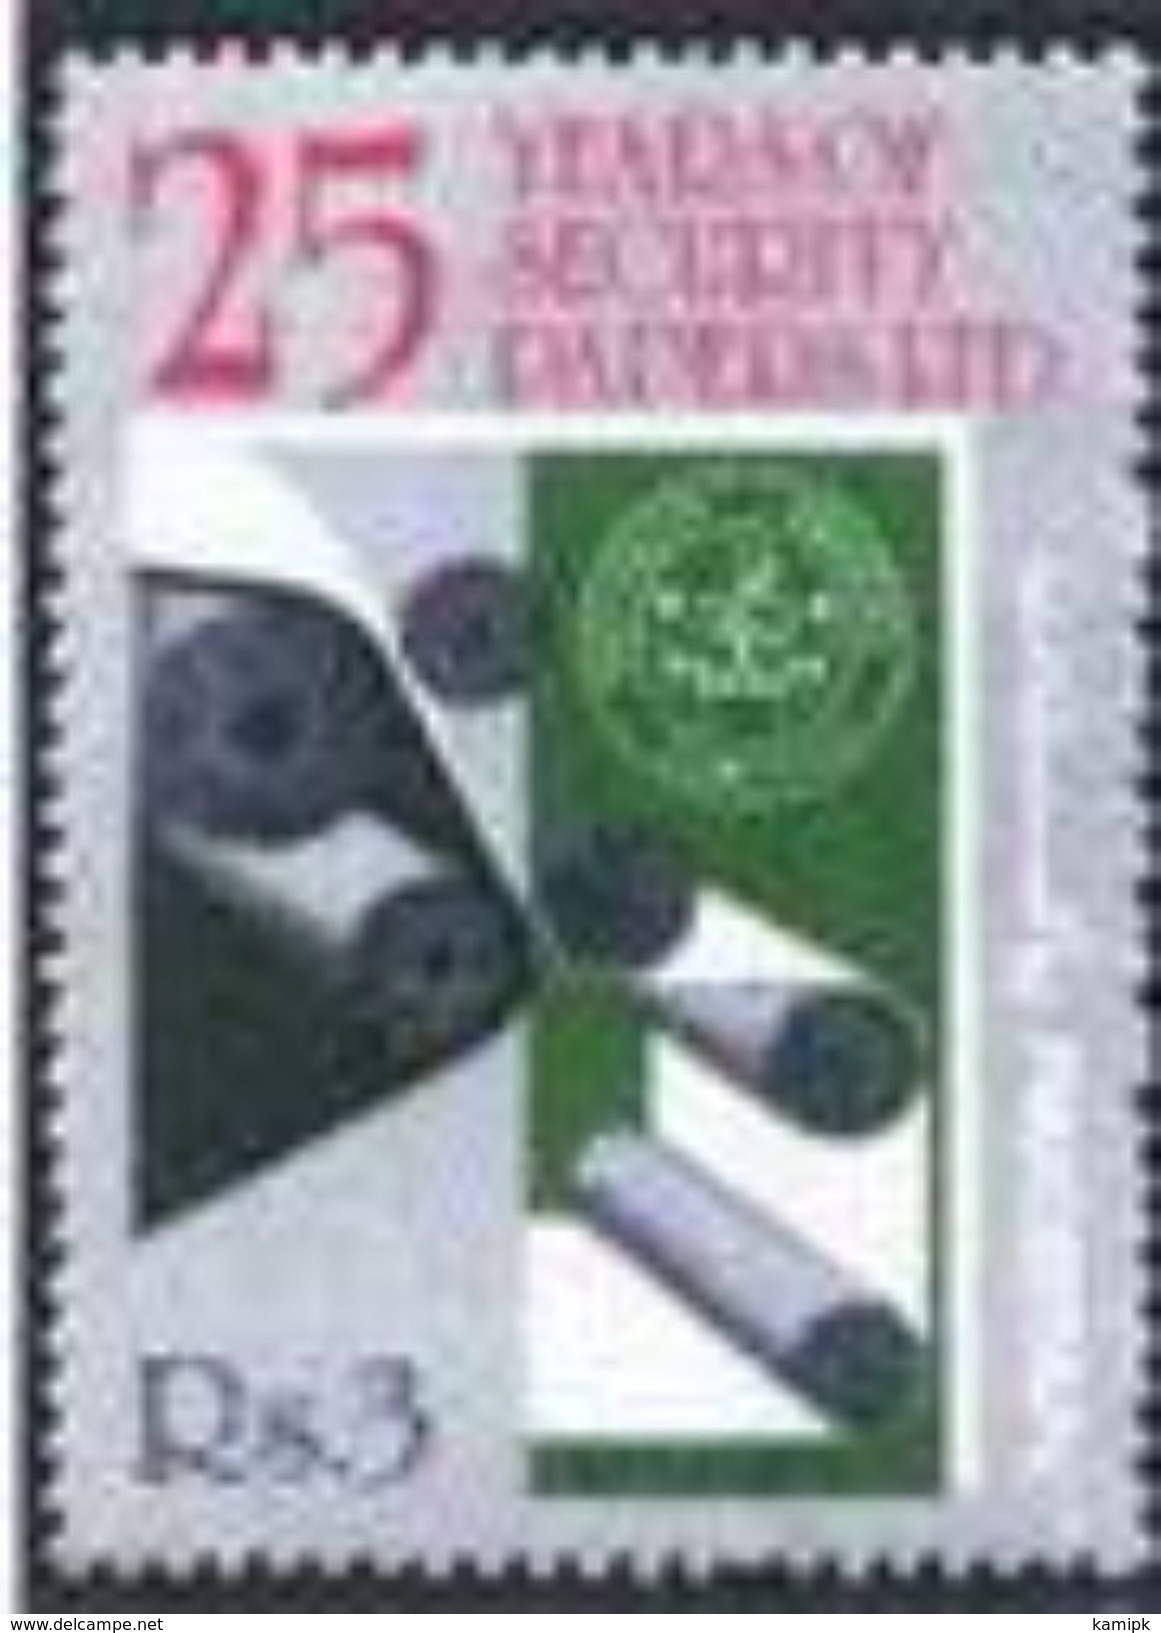 PAKISTAN MNH** STAMPS ,1990 The 25th Anniversary Of Security Papers Limited - Pakistan